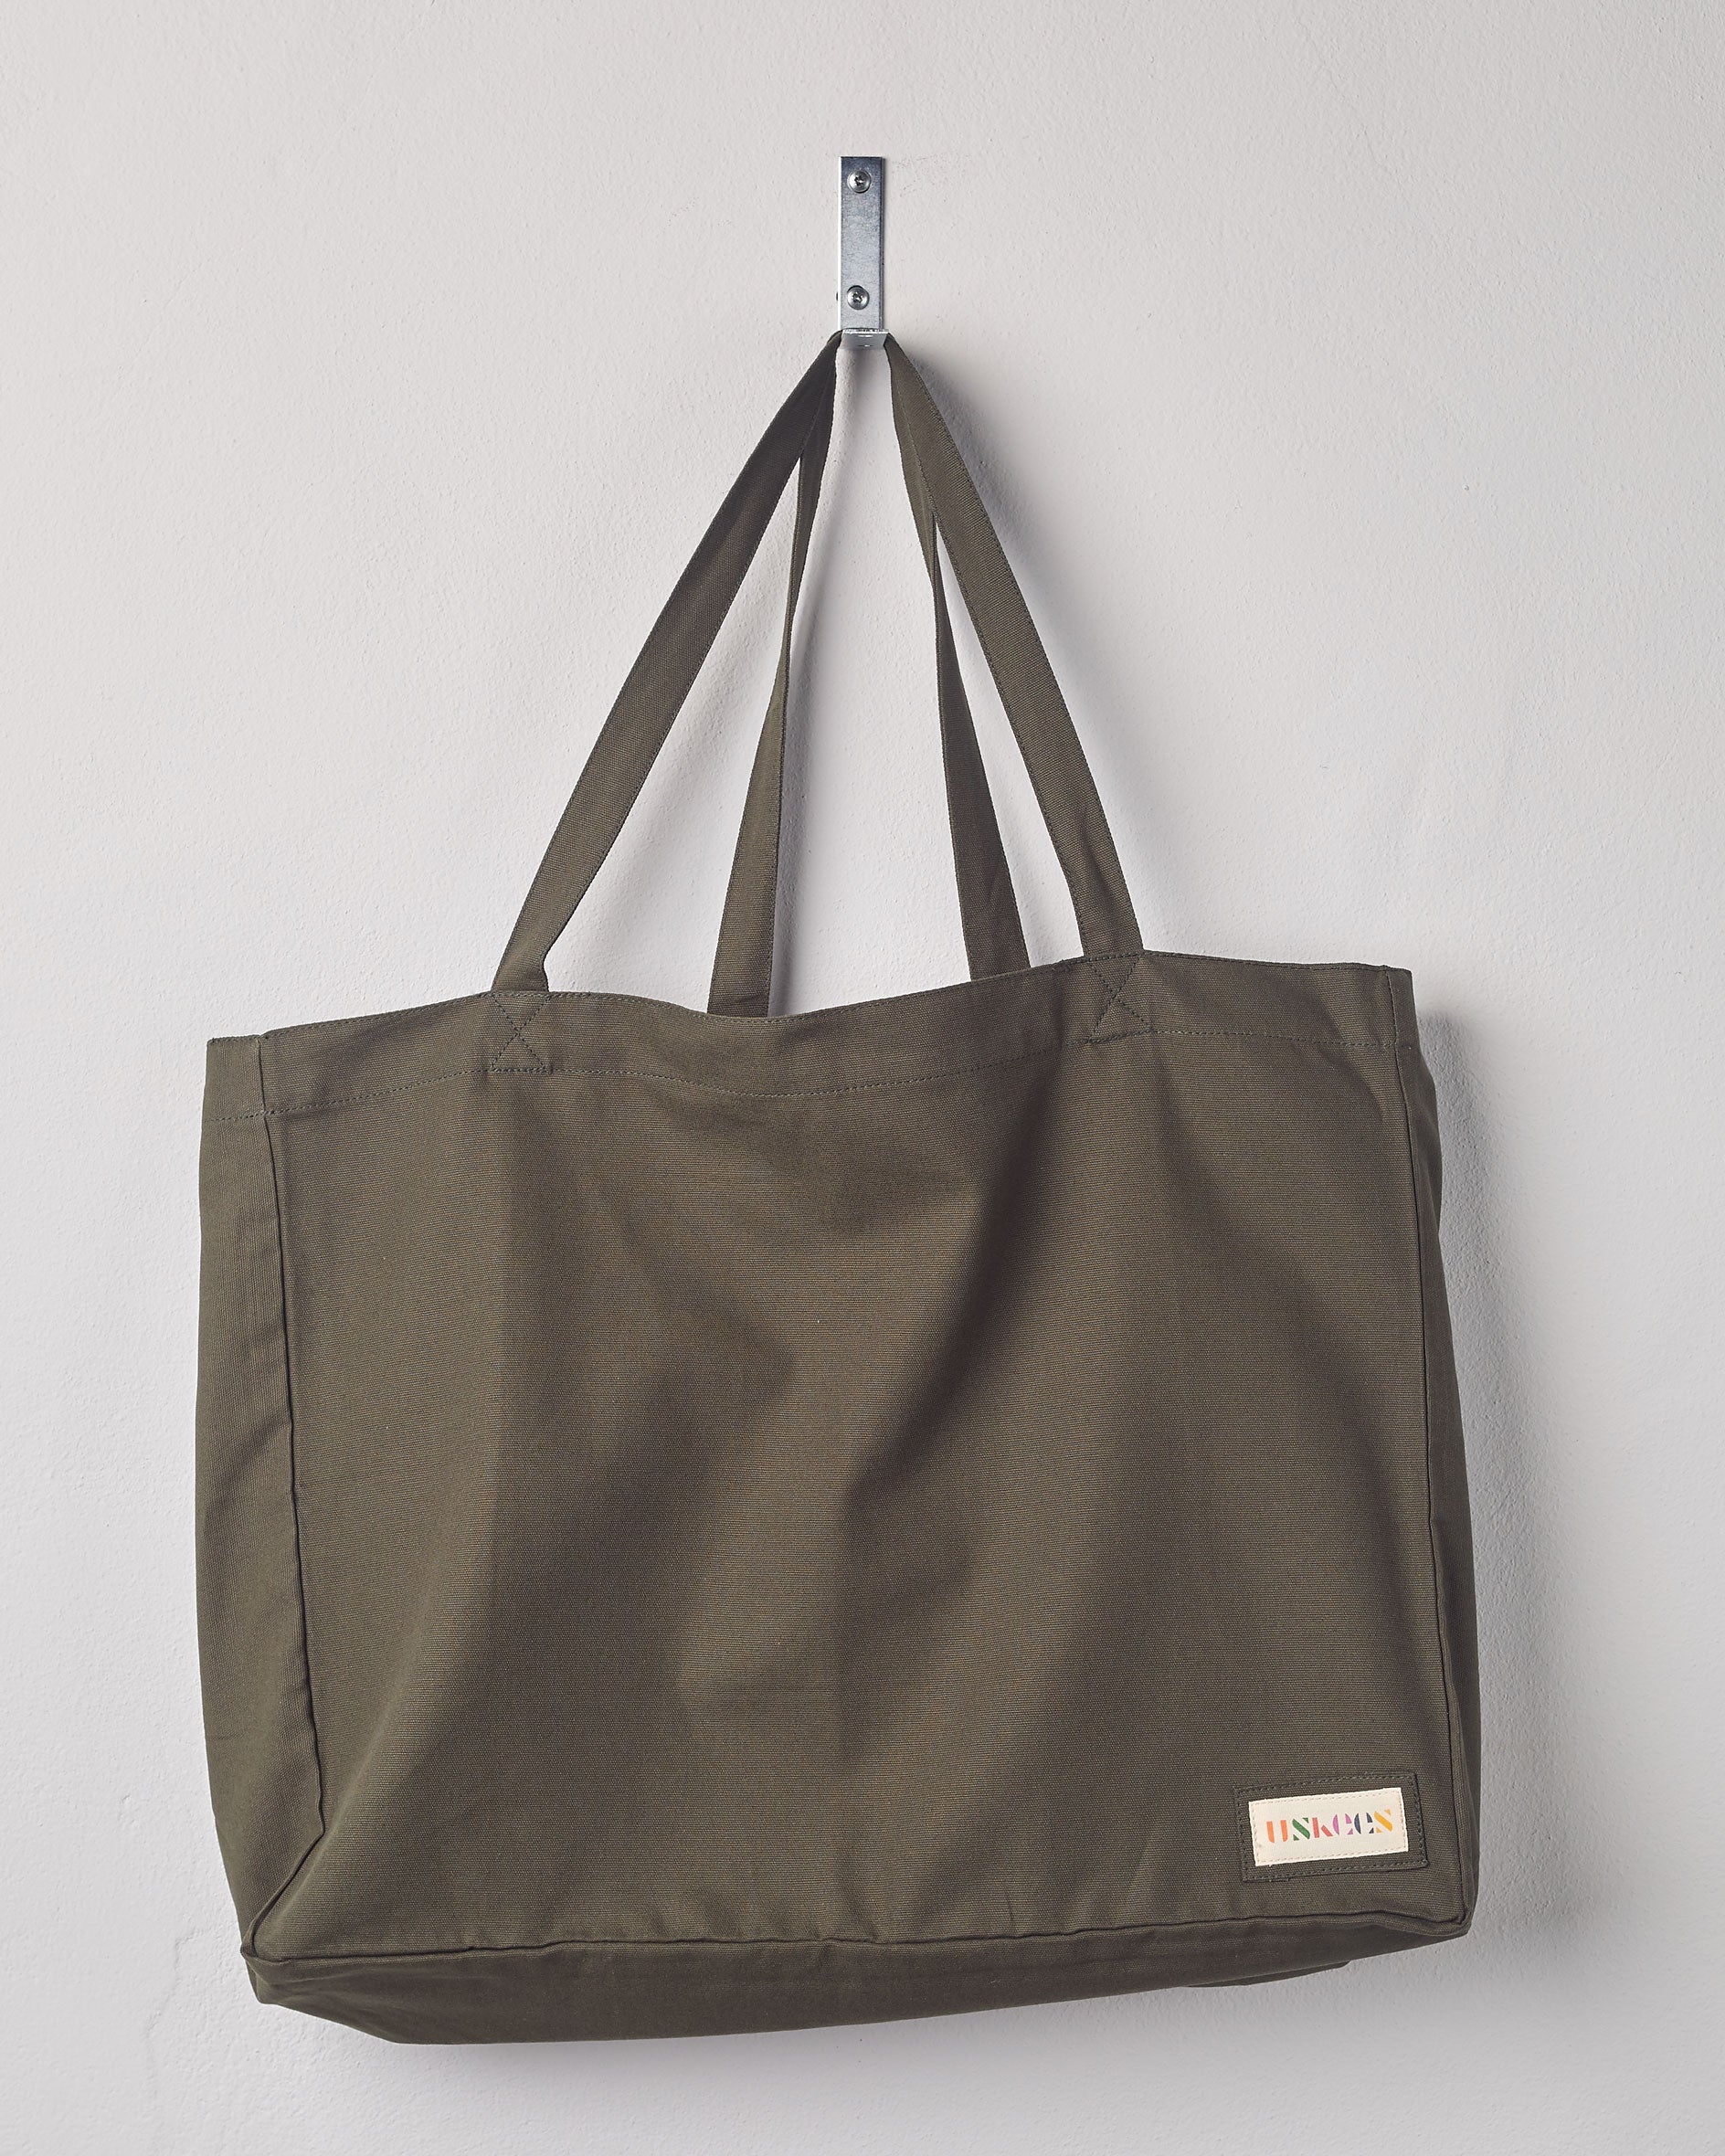 Full, flat view of Uskees #4001, large vine green tote bag, showing twin handles and Uskees woven logo. 